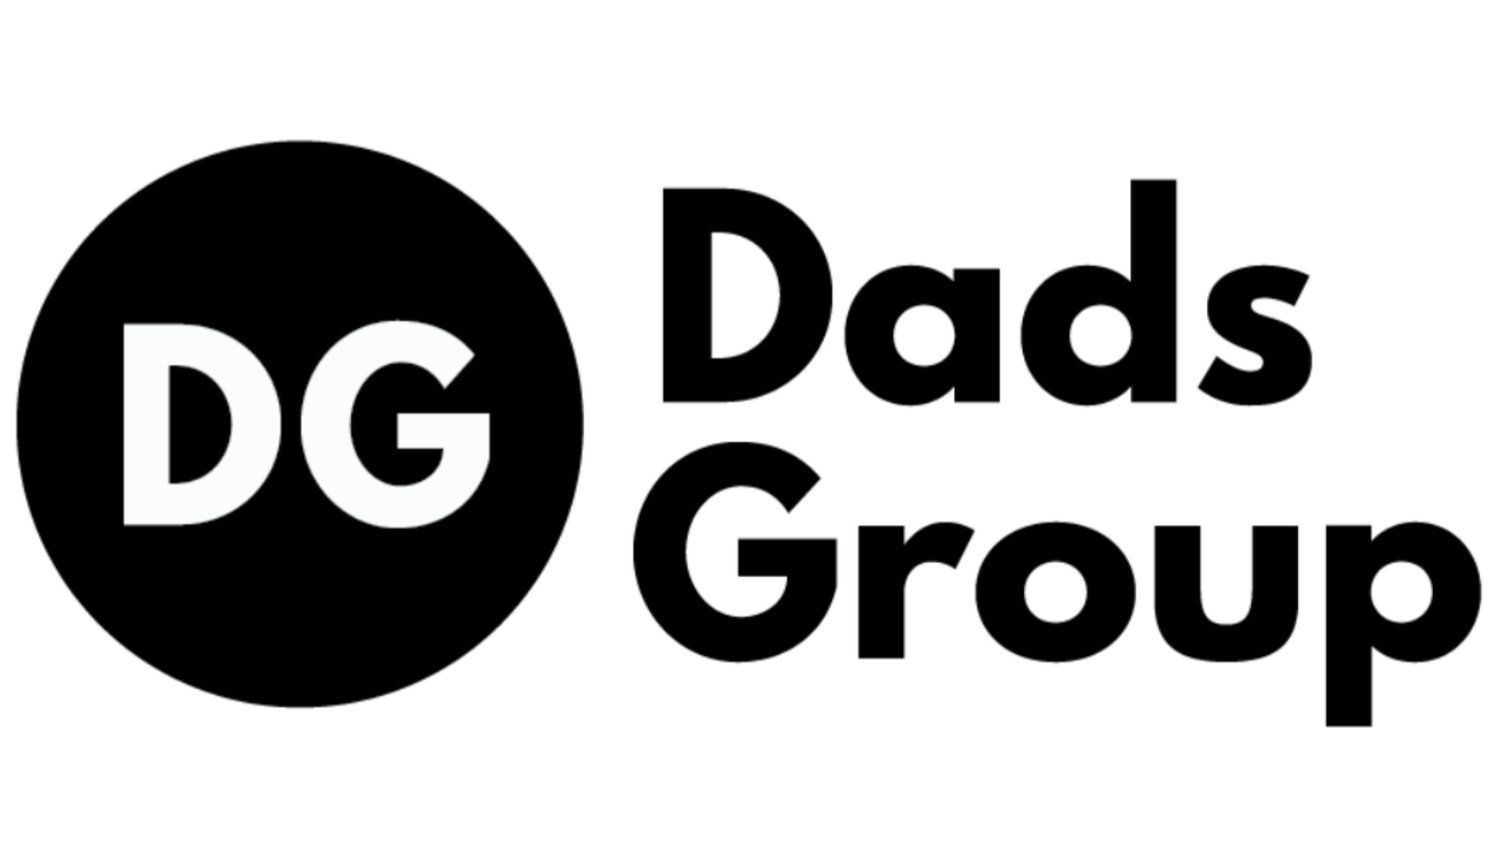 Dads Group